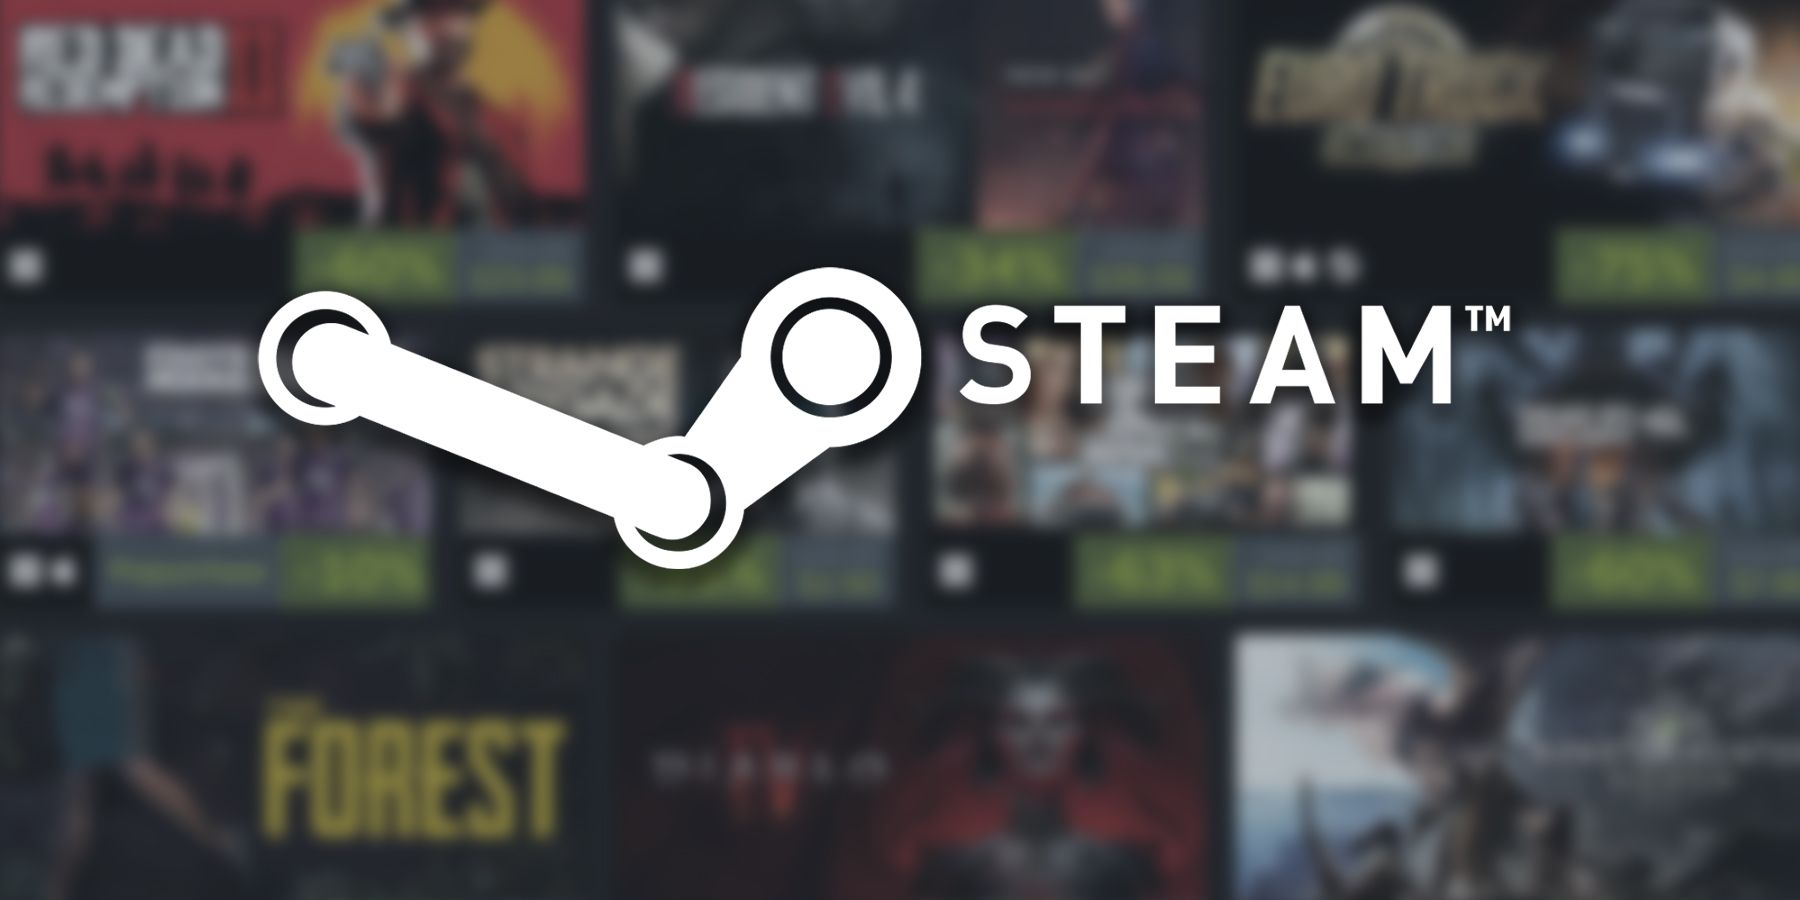 Singapore Steam store: some games reverted back to US store pricing